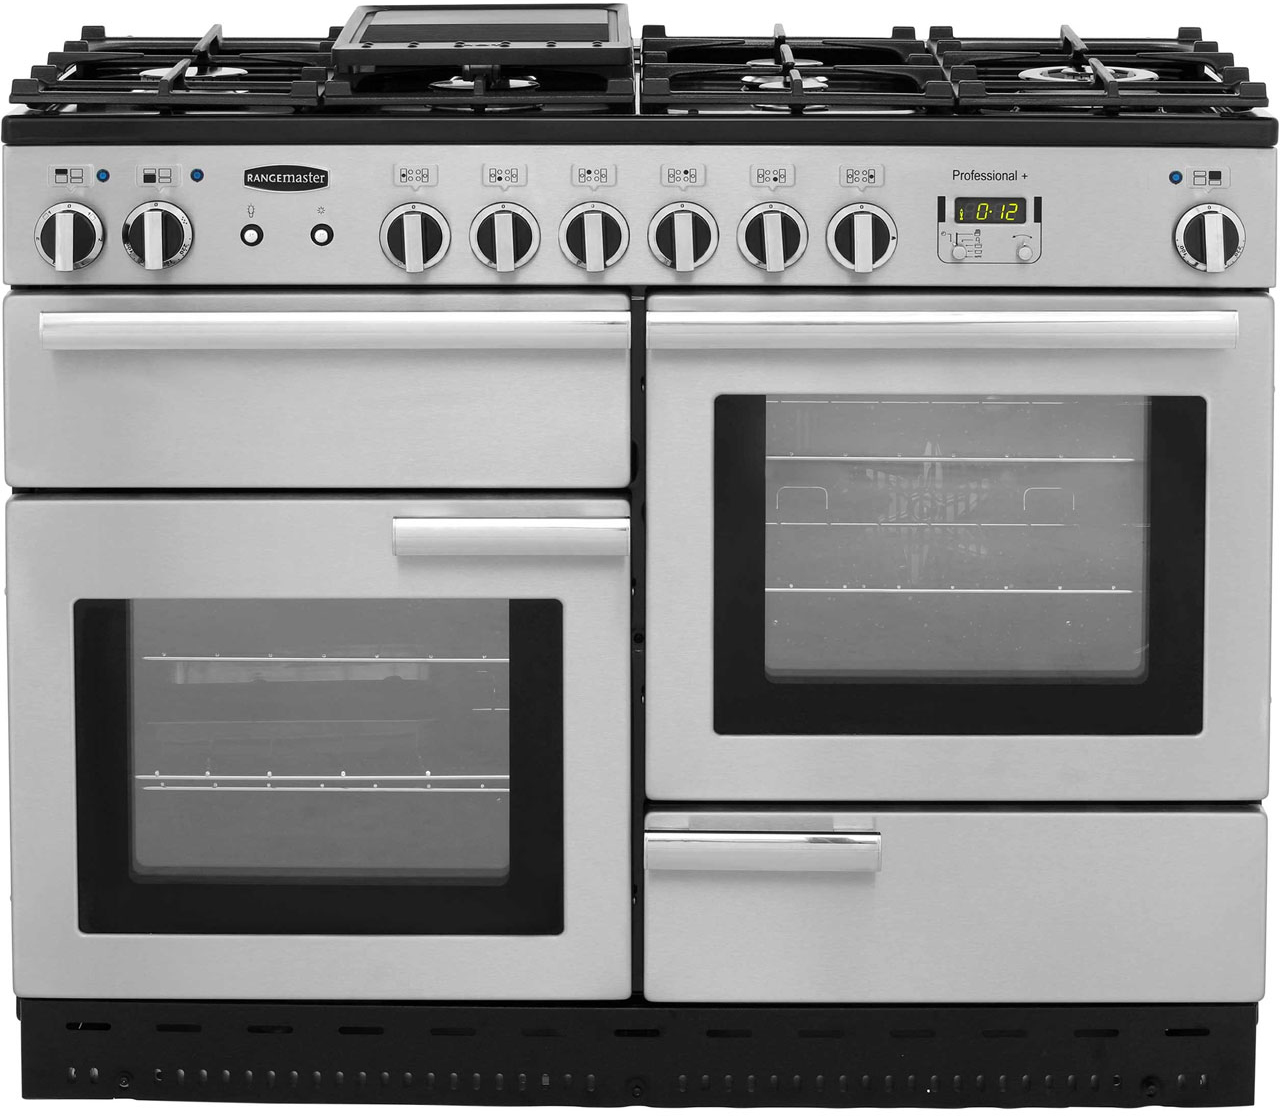 Large range oven cleaned by Ultra Clean Ovens from £125